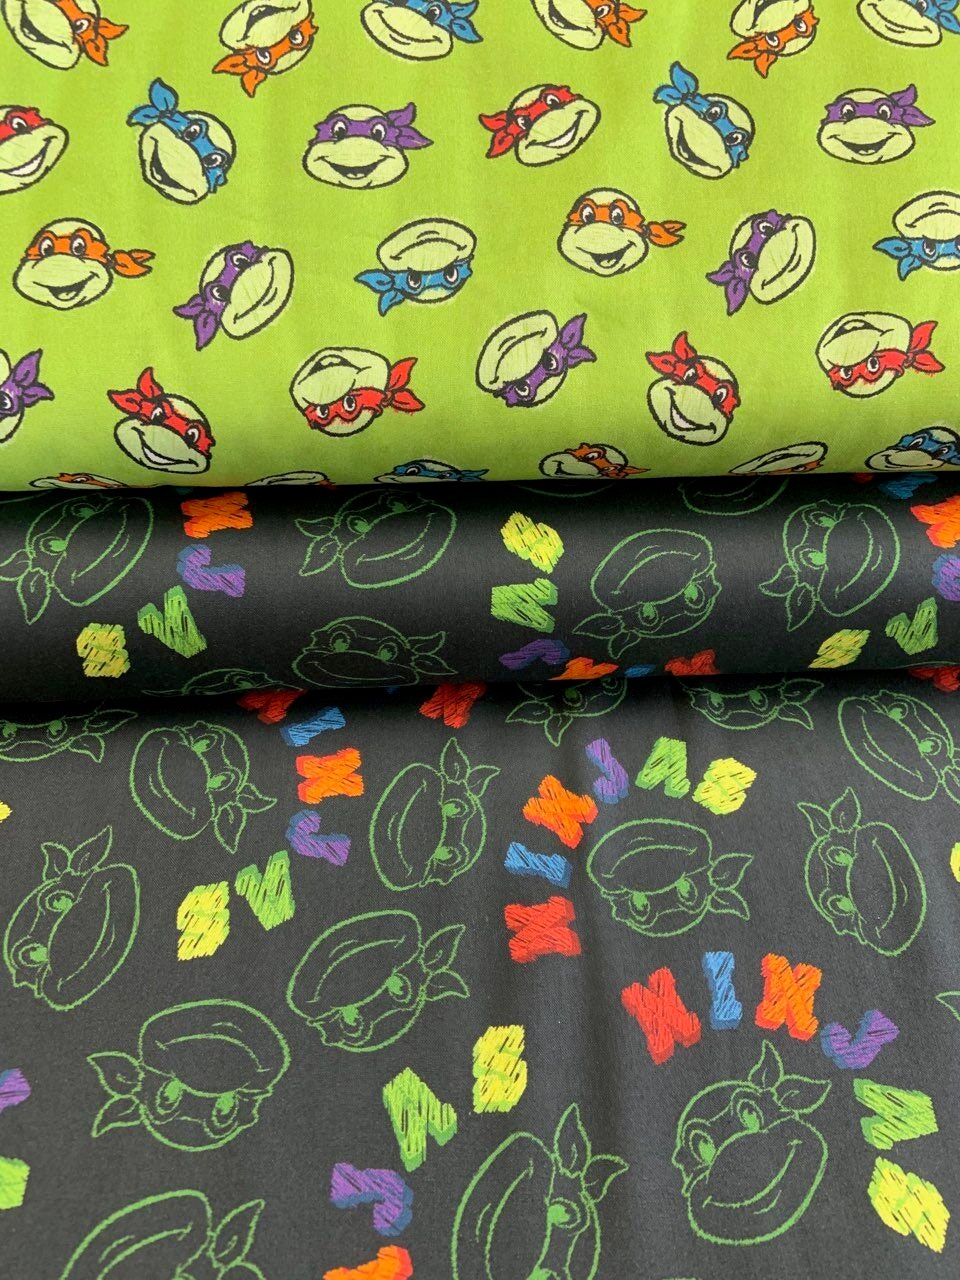 Licensed Nickelodeon TMNT Sketch Toss 70312B110715 Cotton Woven Fabric